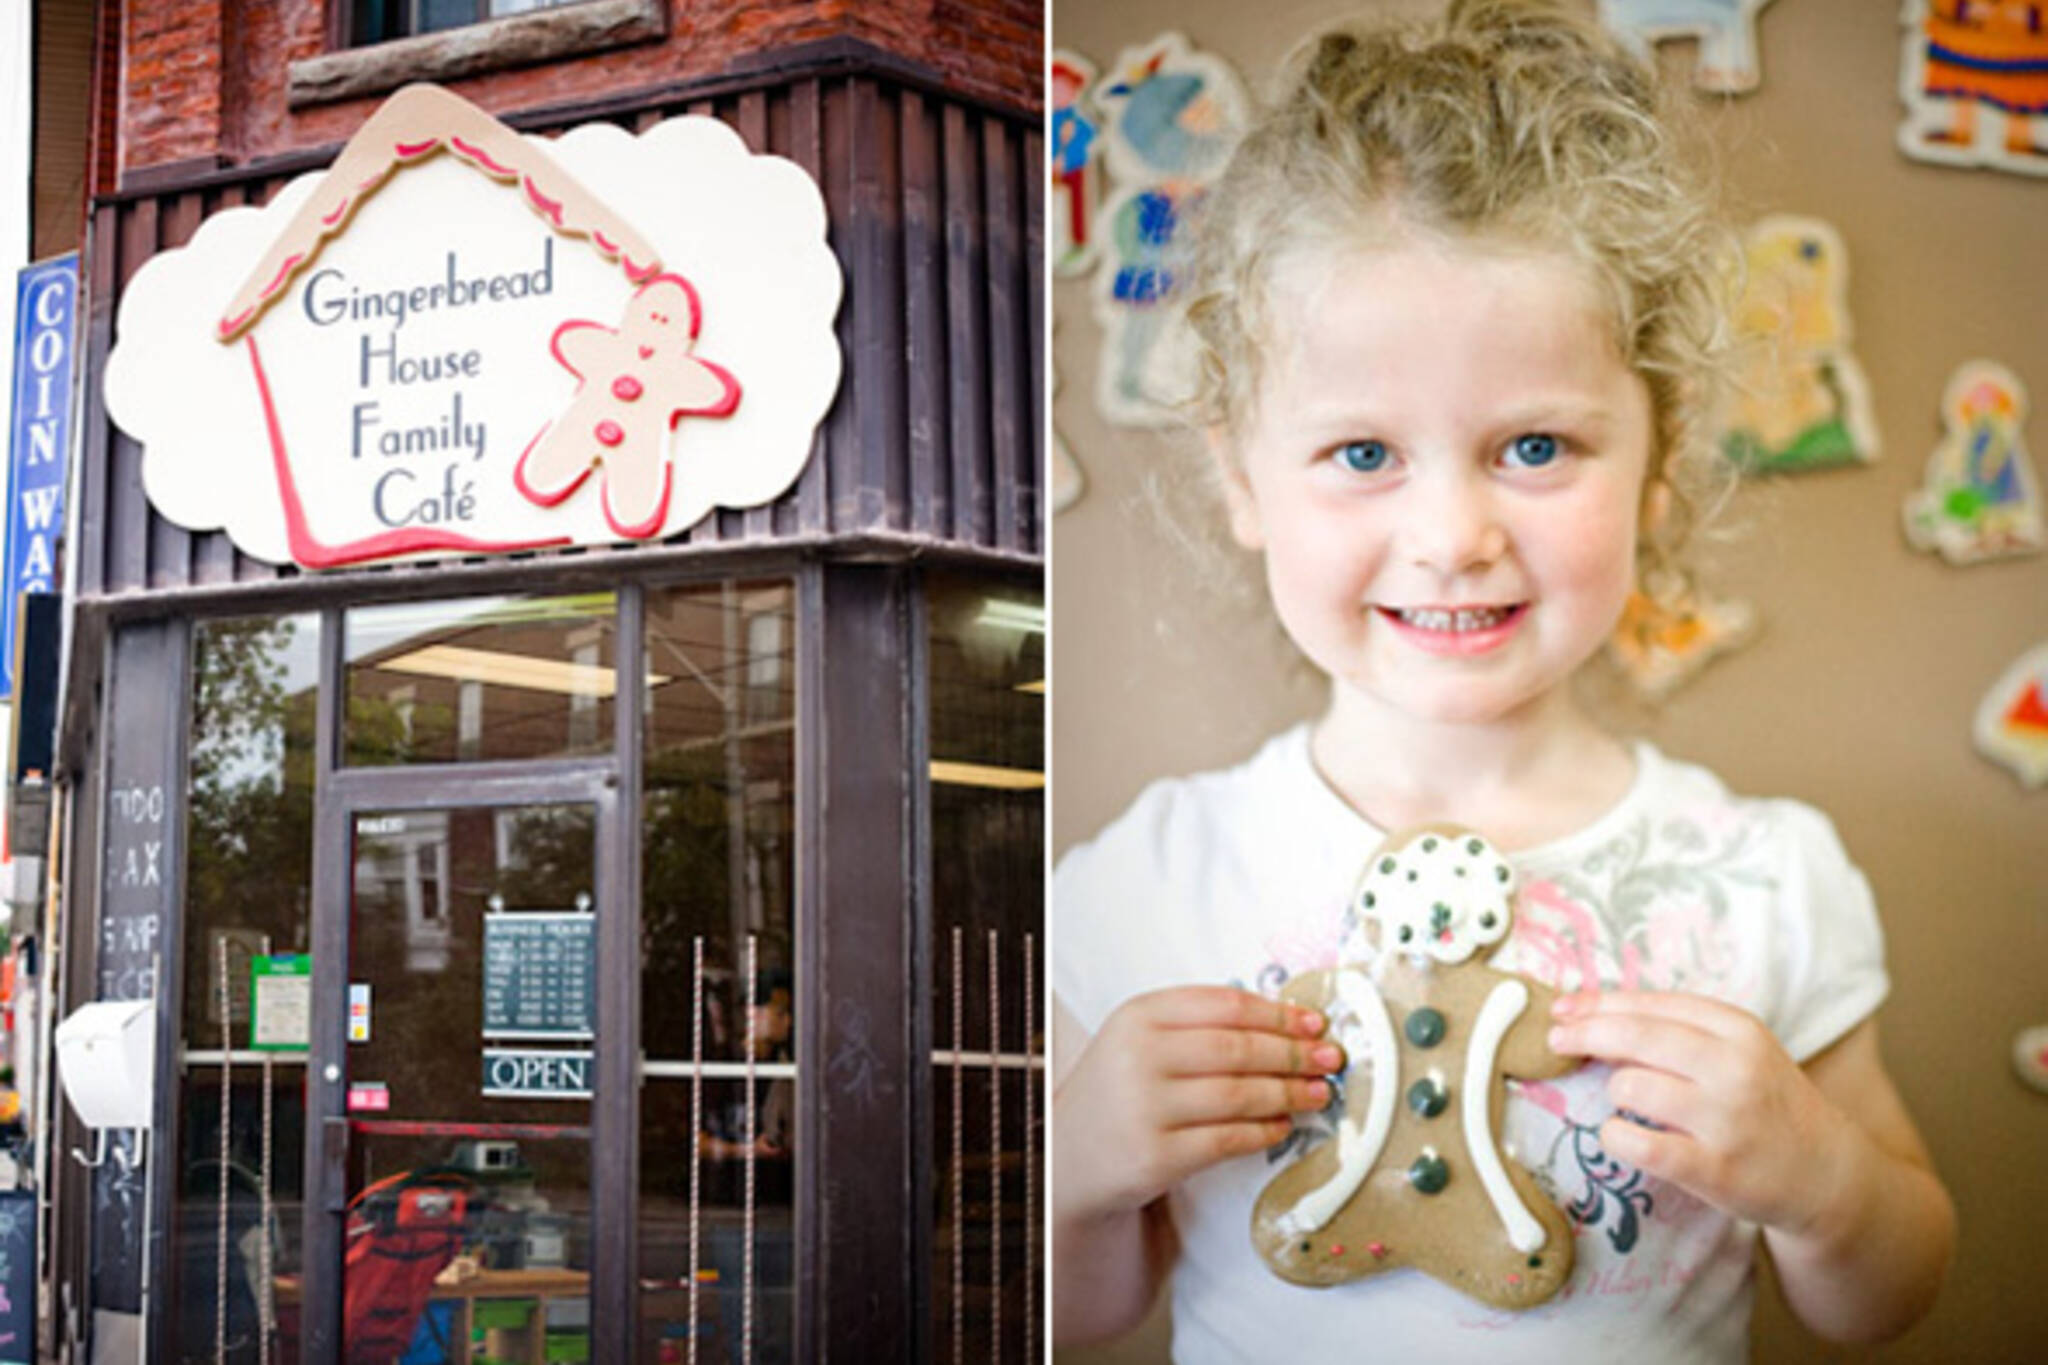 The Gingerbread House Family Cafe